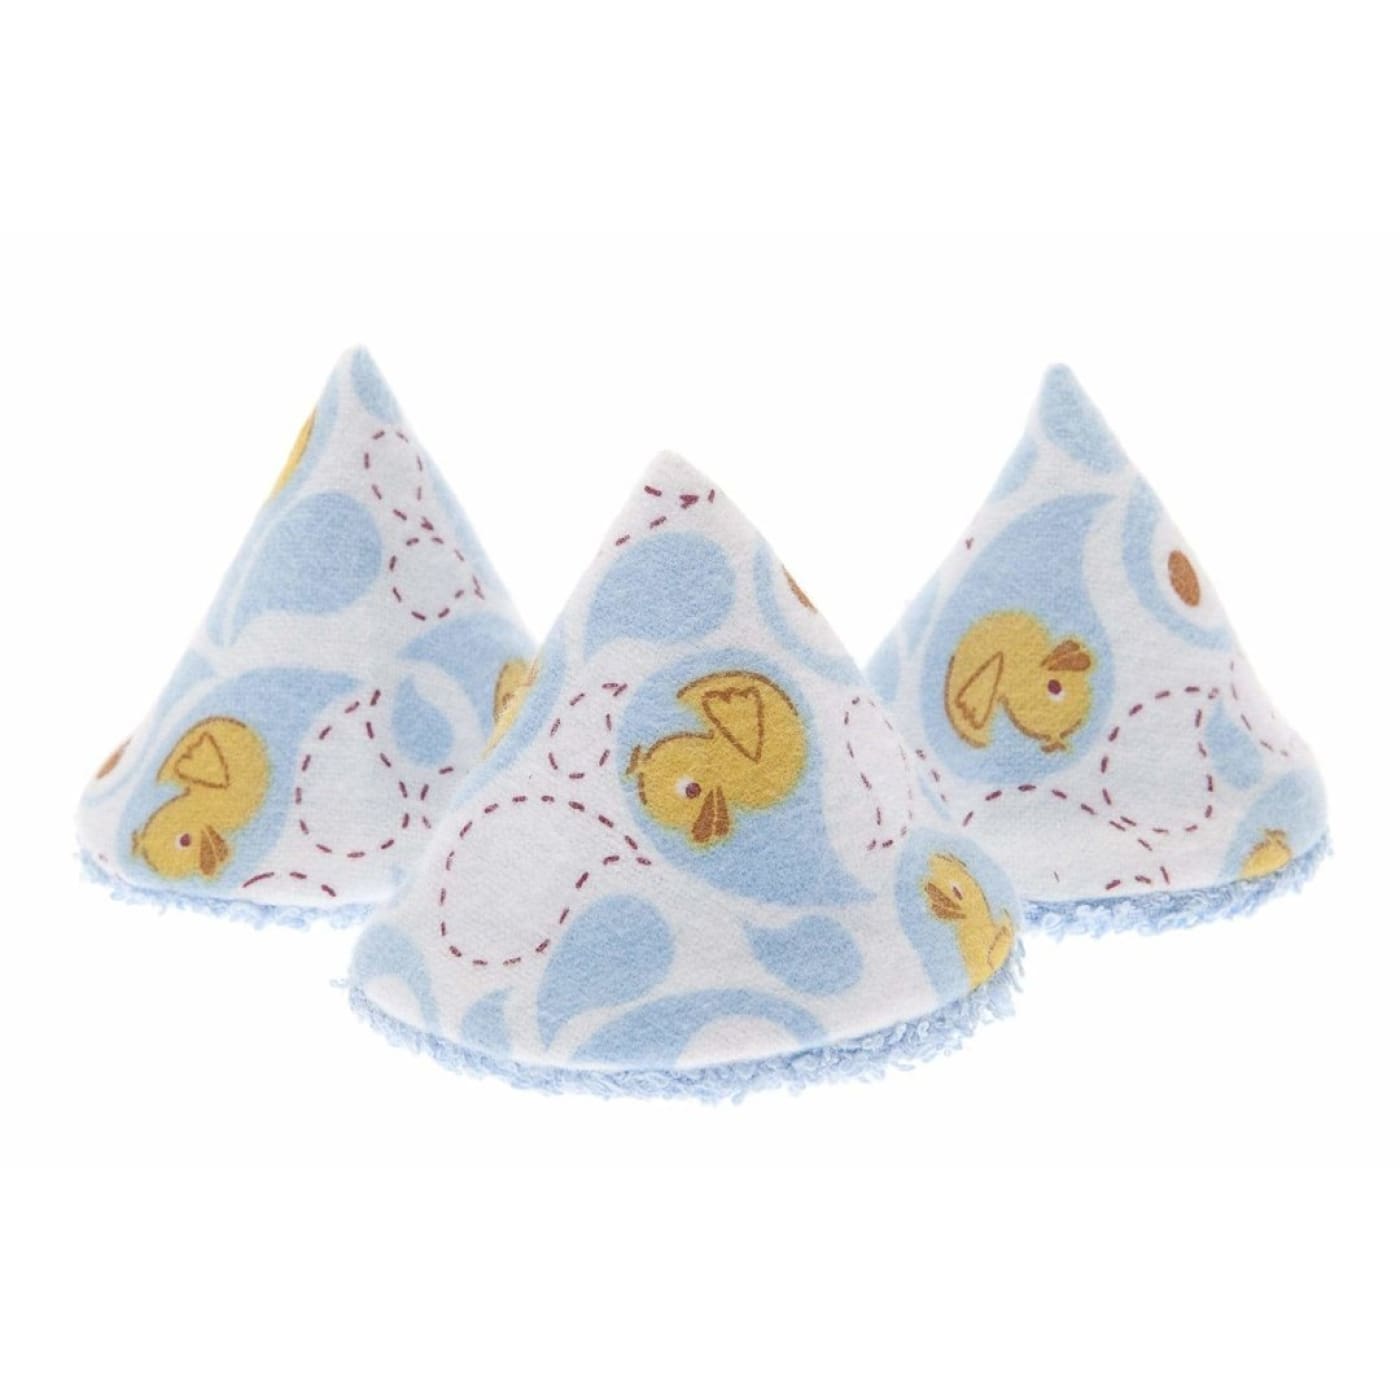 Pee-pee Teepee - Rubber Ducky - Rubber Ducky - BATHTIME & CHANGING - NAPPIES/WIPES/ACCESSORIES